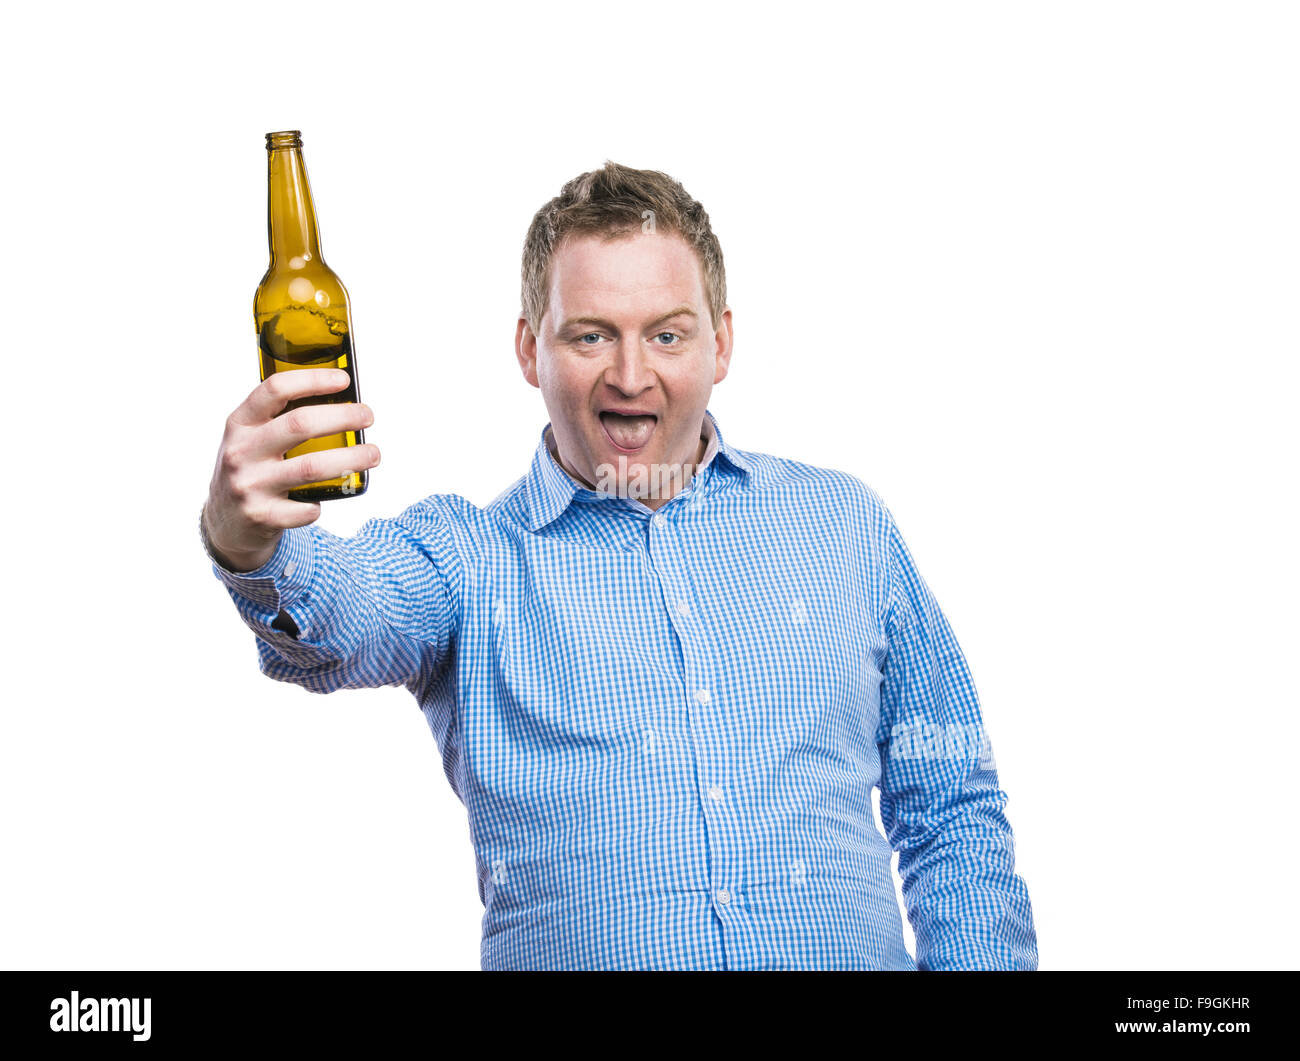 Funny young drunk man holding a beer bottle. Studio shot on white ...